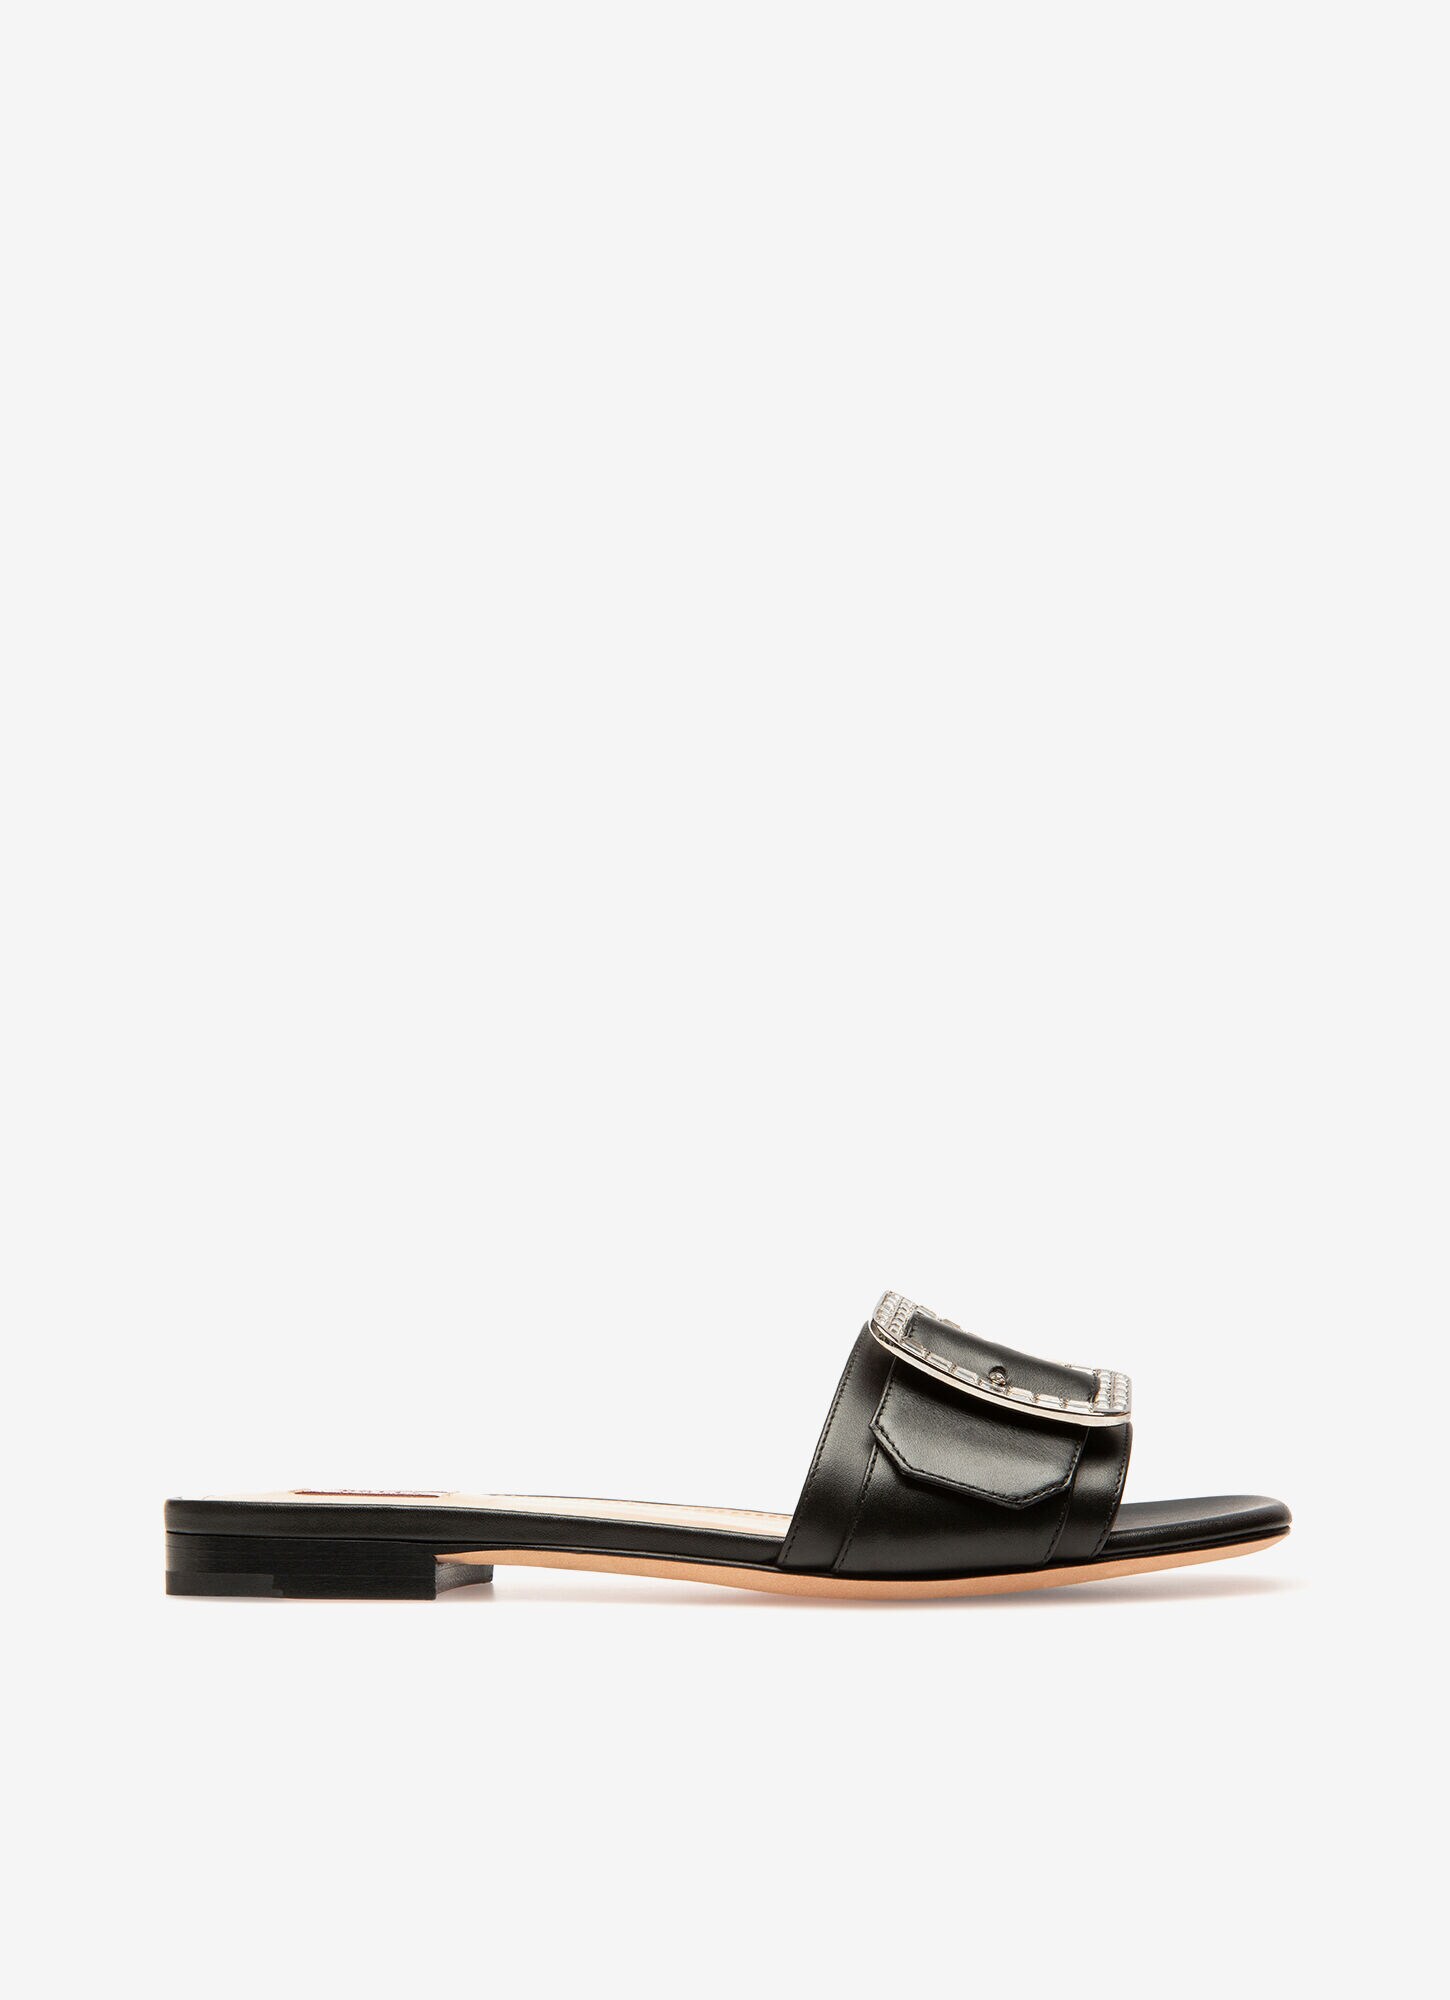 leather womens slides